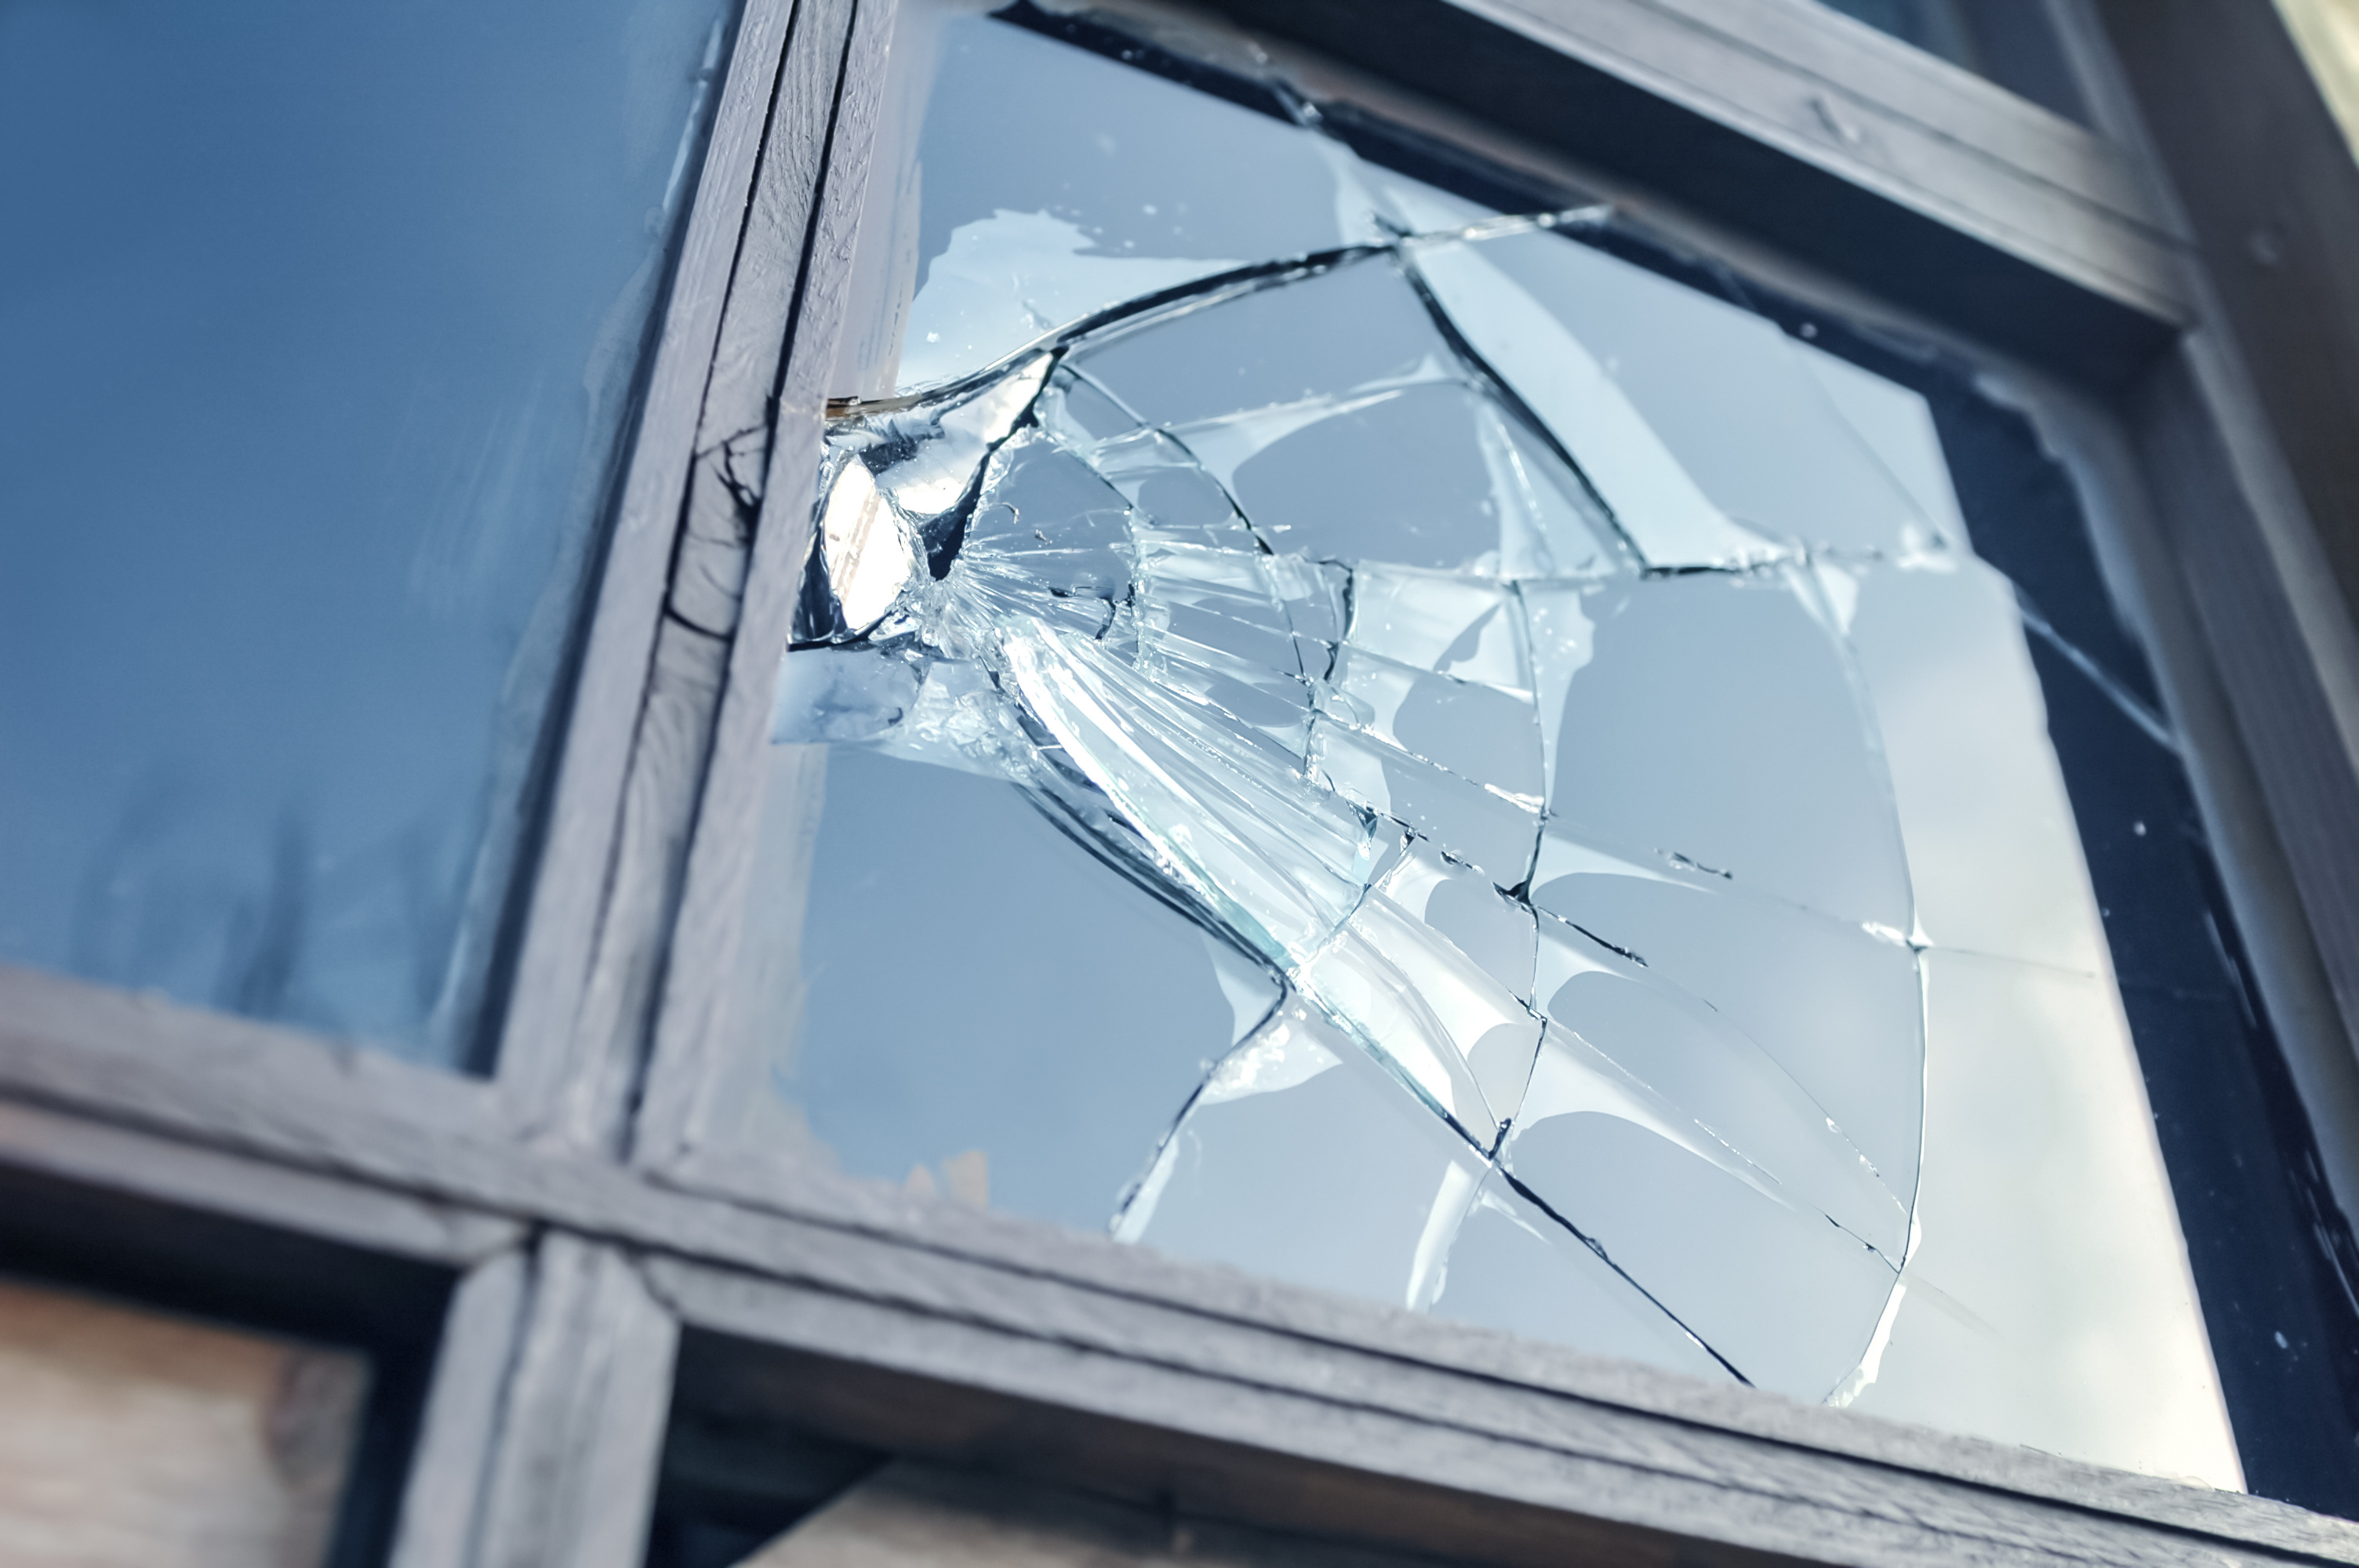 A window damaged in a criminal mischeif charge.